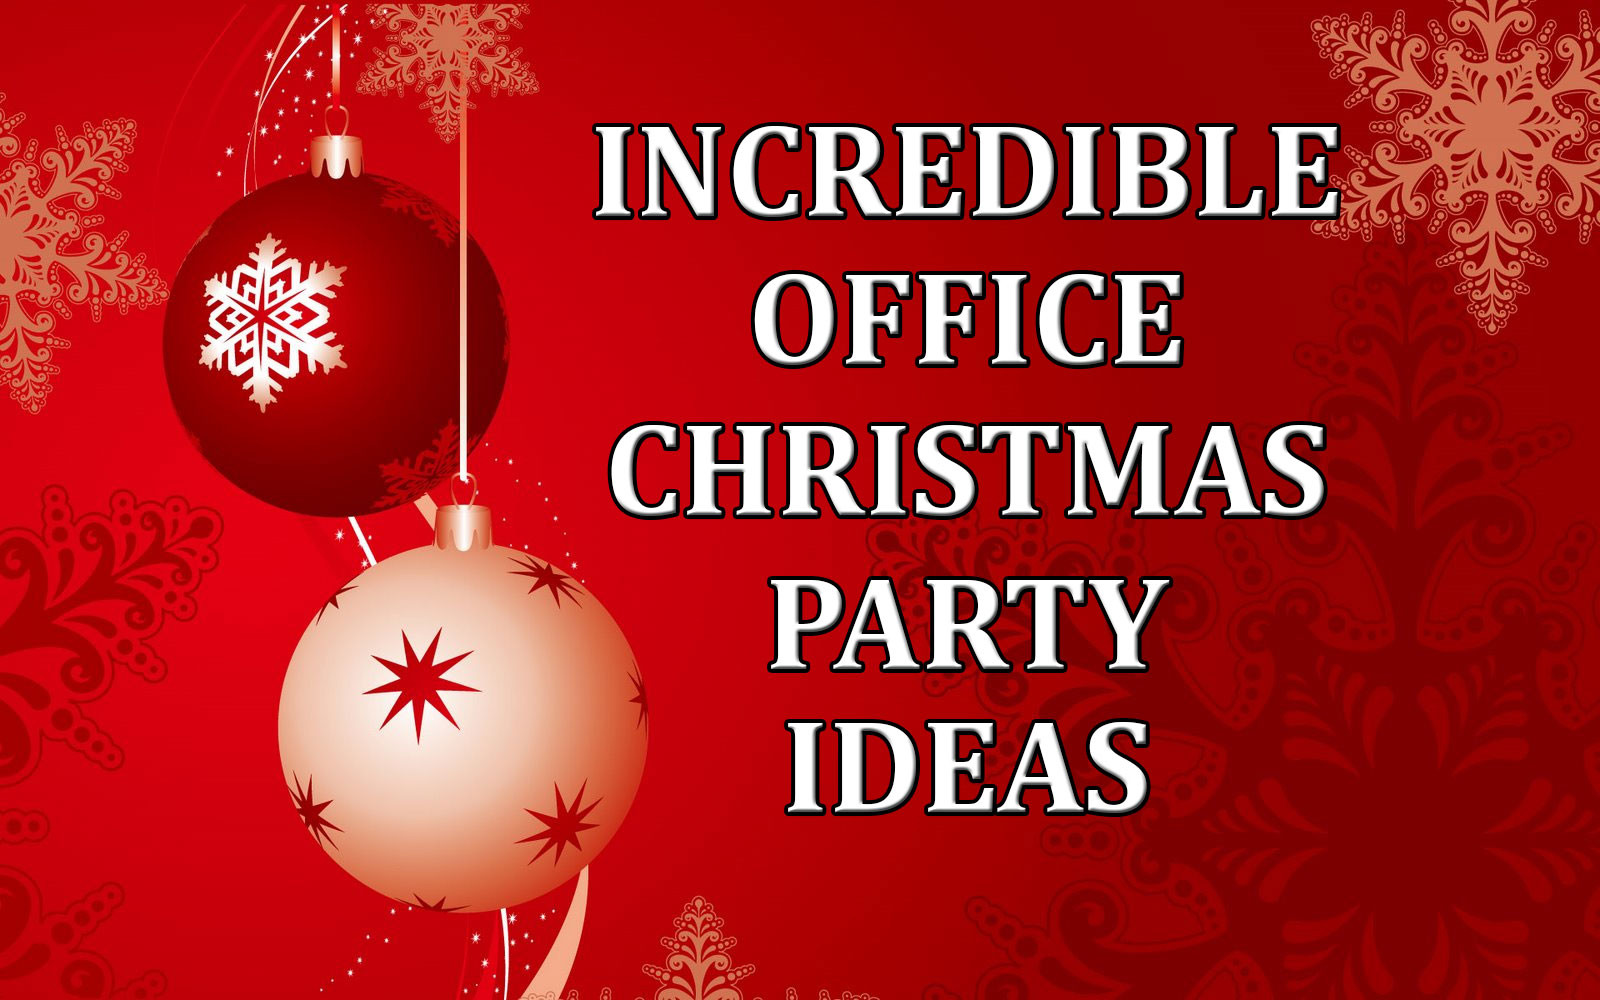 Small Christmas Party Ideas
 Incredible fice Christmas Party Ideas edy Ventriloquist